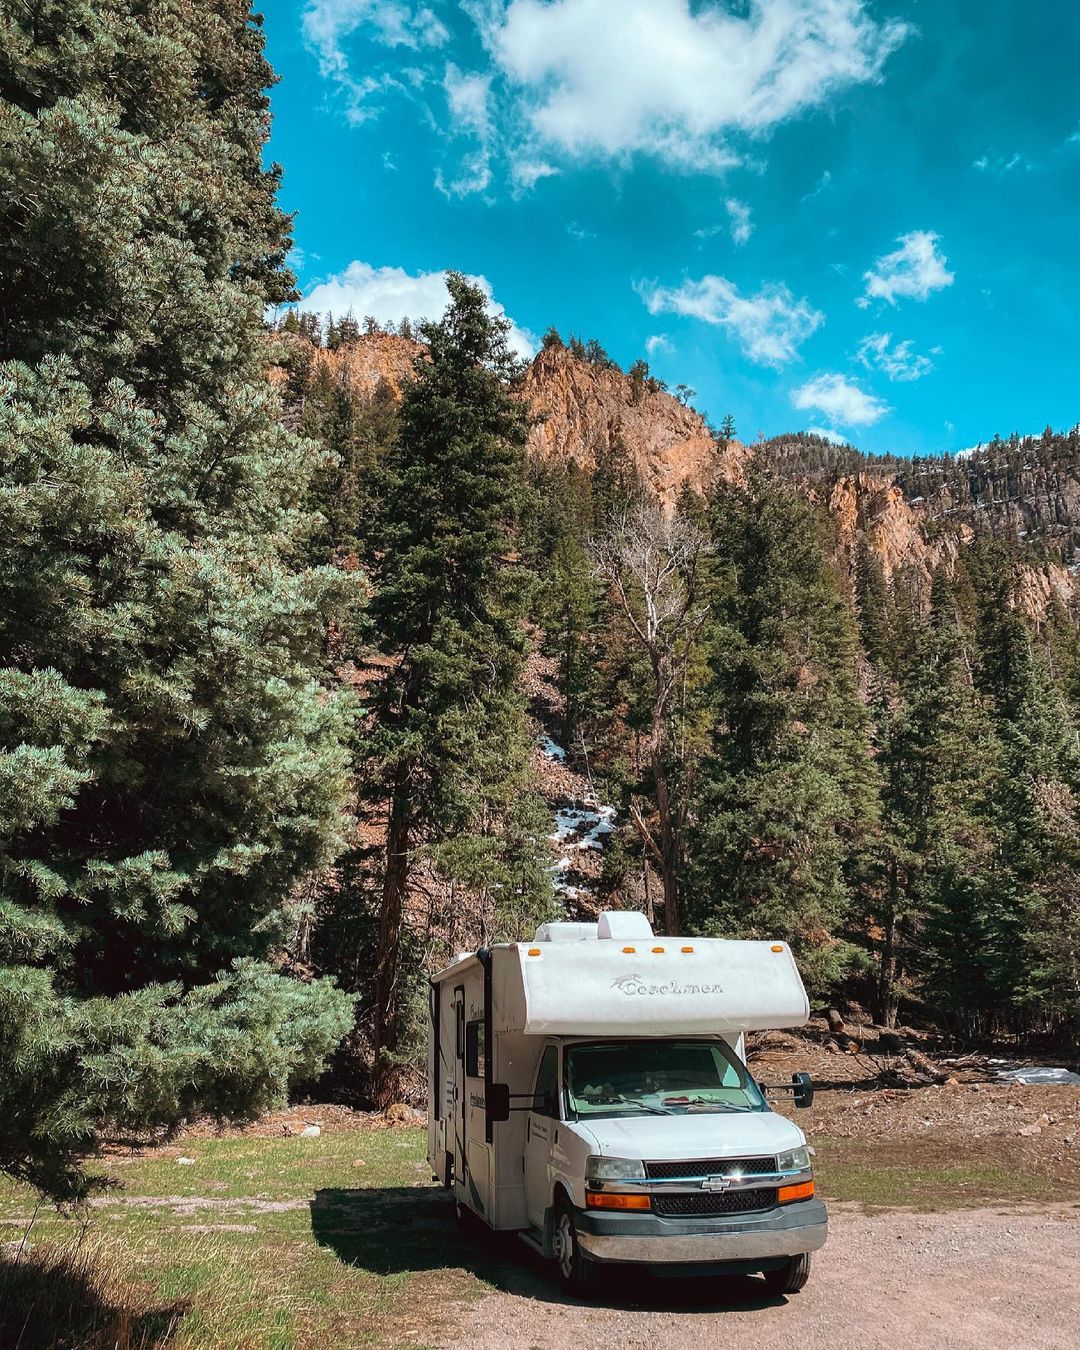 RV Parked in the Mountains in Colorado. Photo by Instagram user @quenchyouradventure